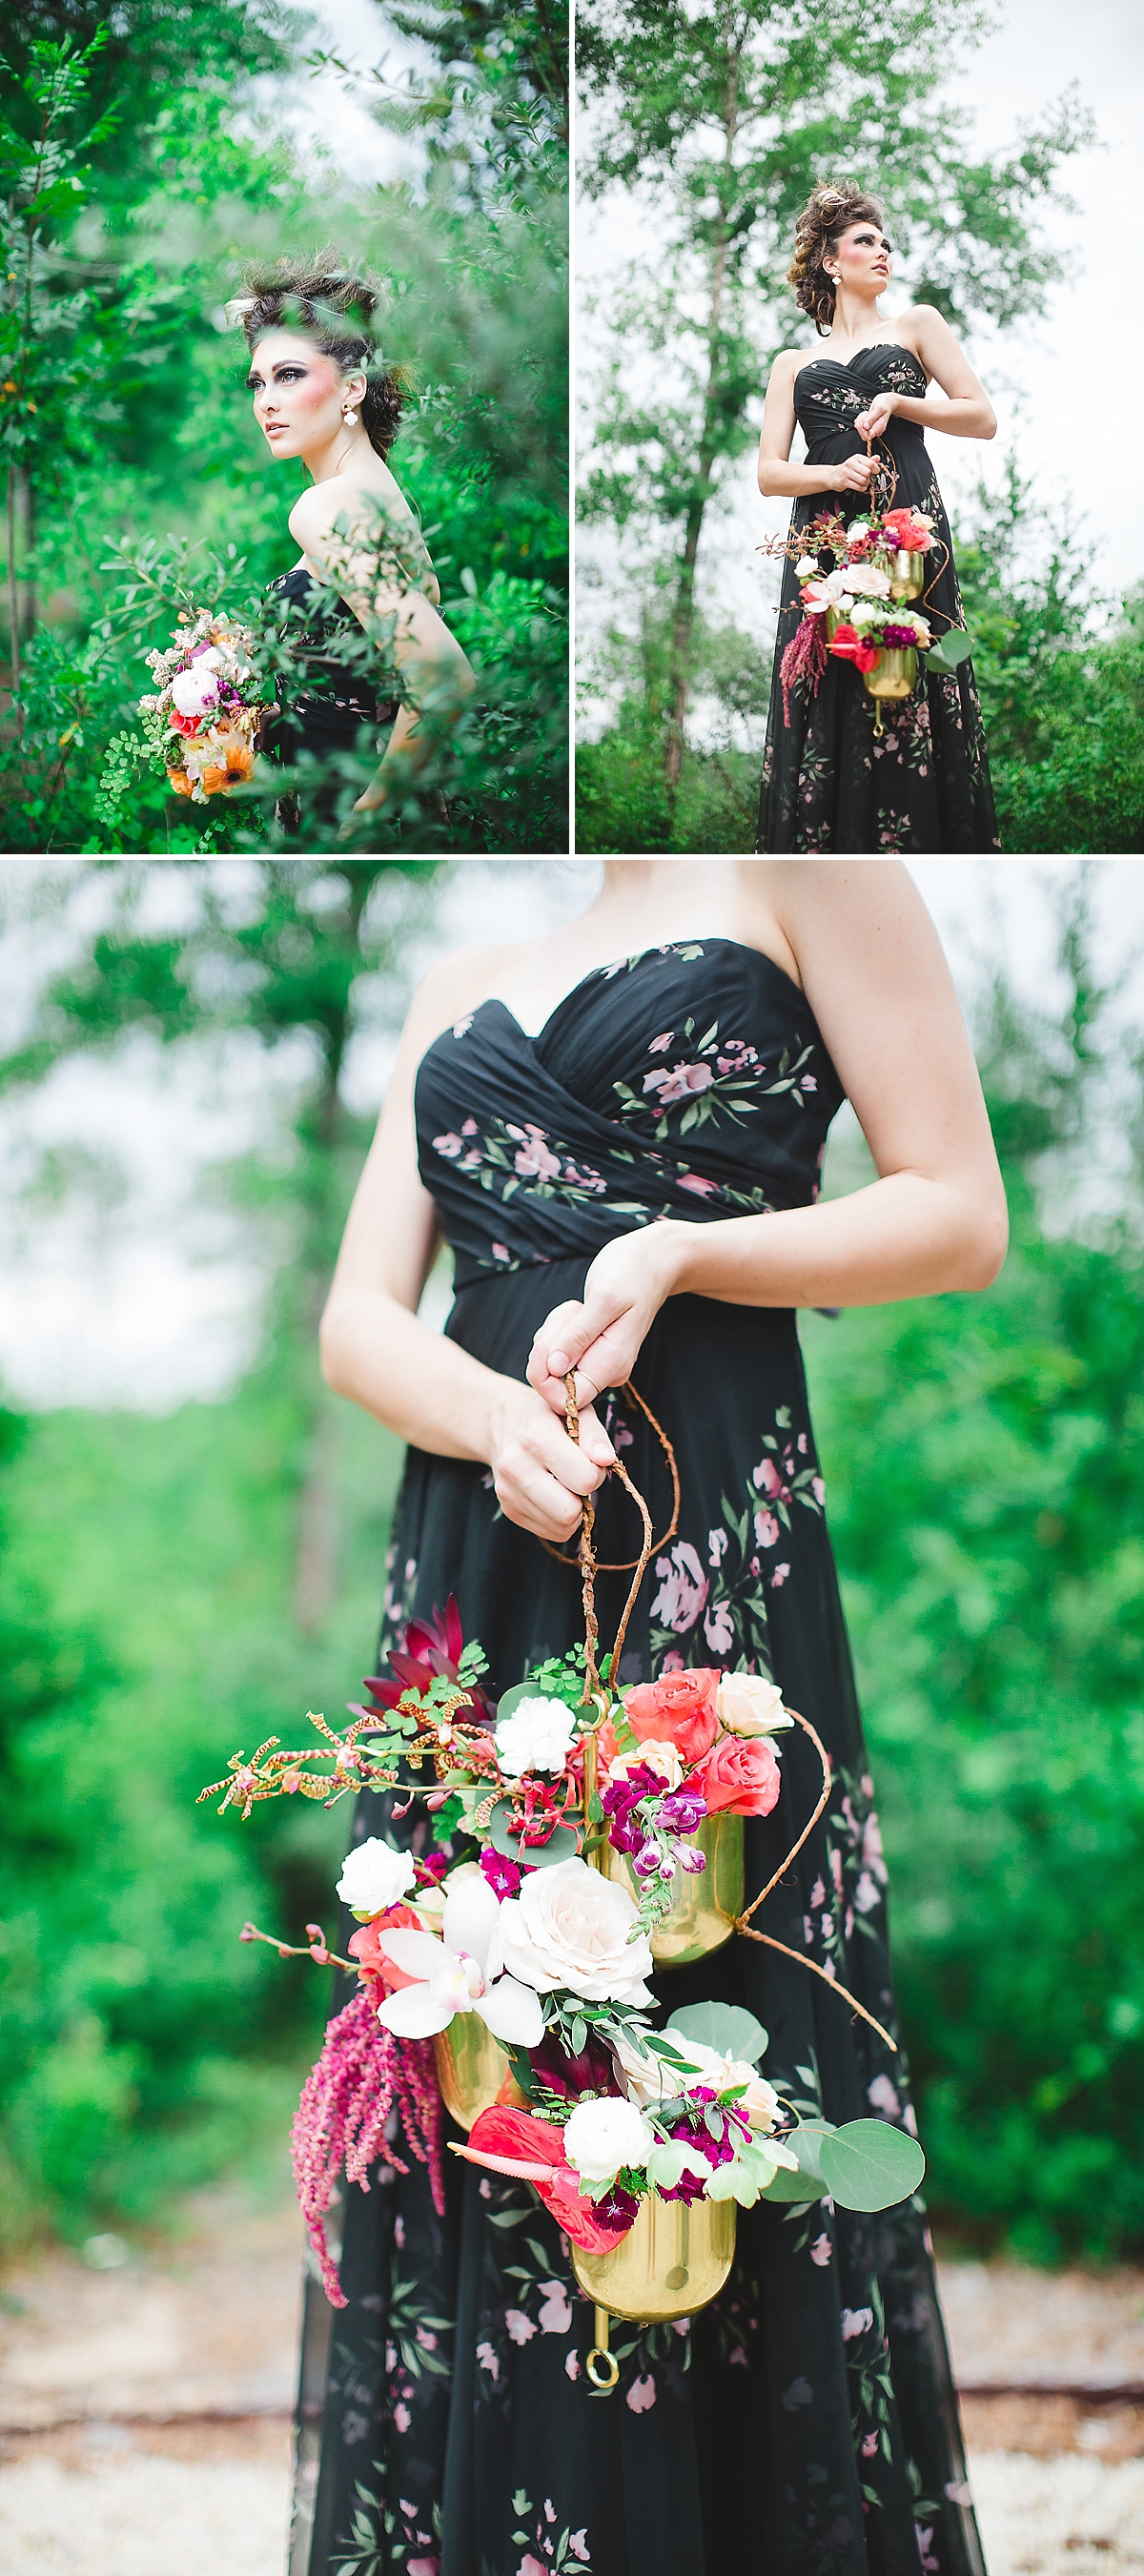 Glamping inspired wedding styled shoot at Coldwater Gardens with Jenny Yoo bridesmaids | Izzy Hudgins Photography